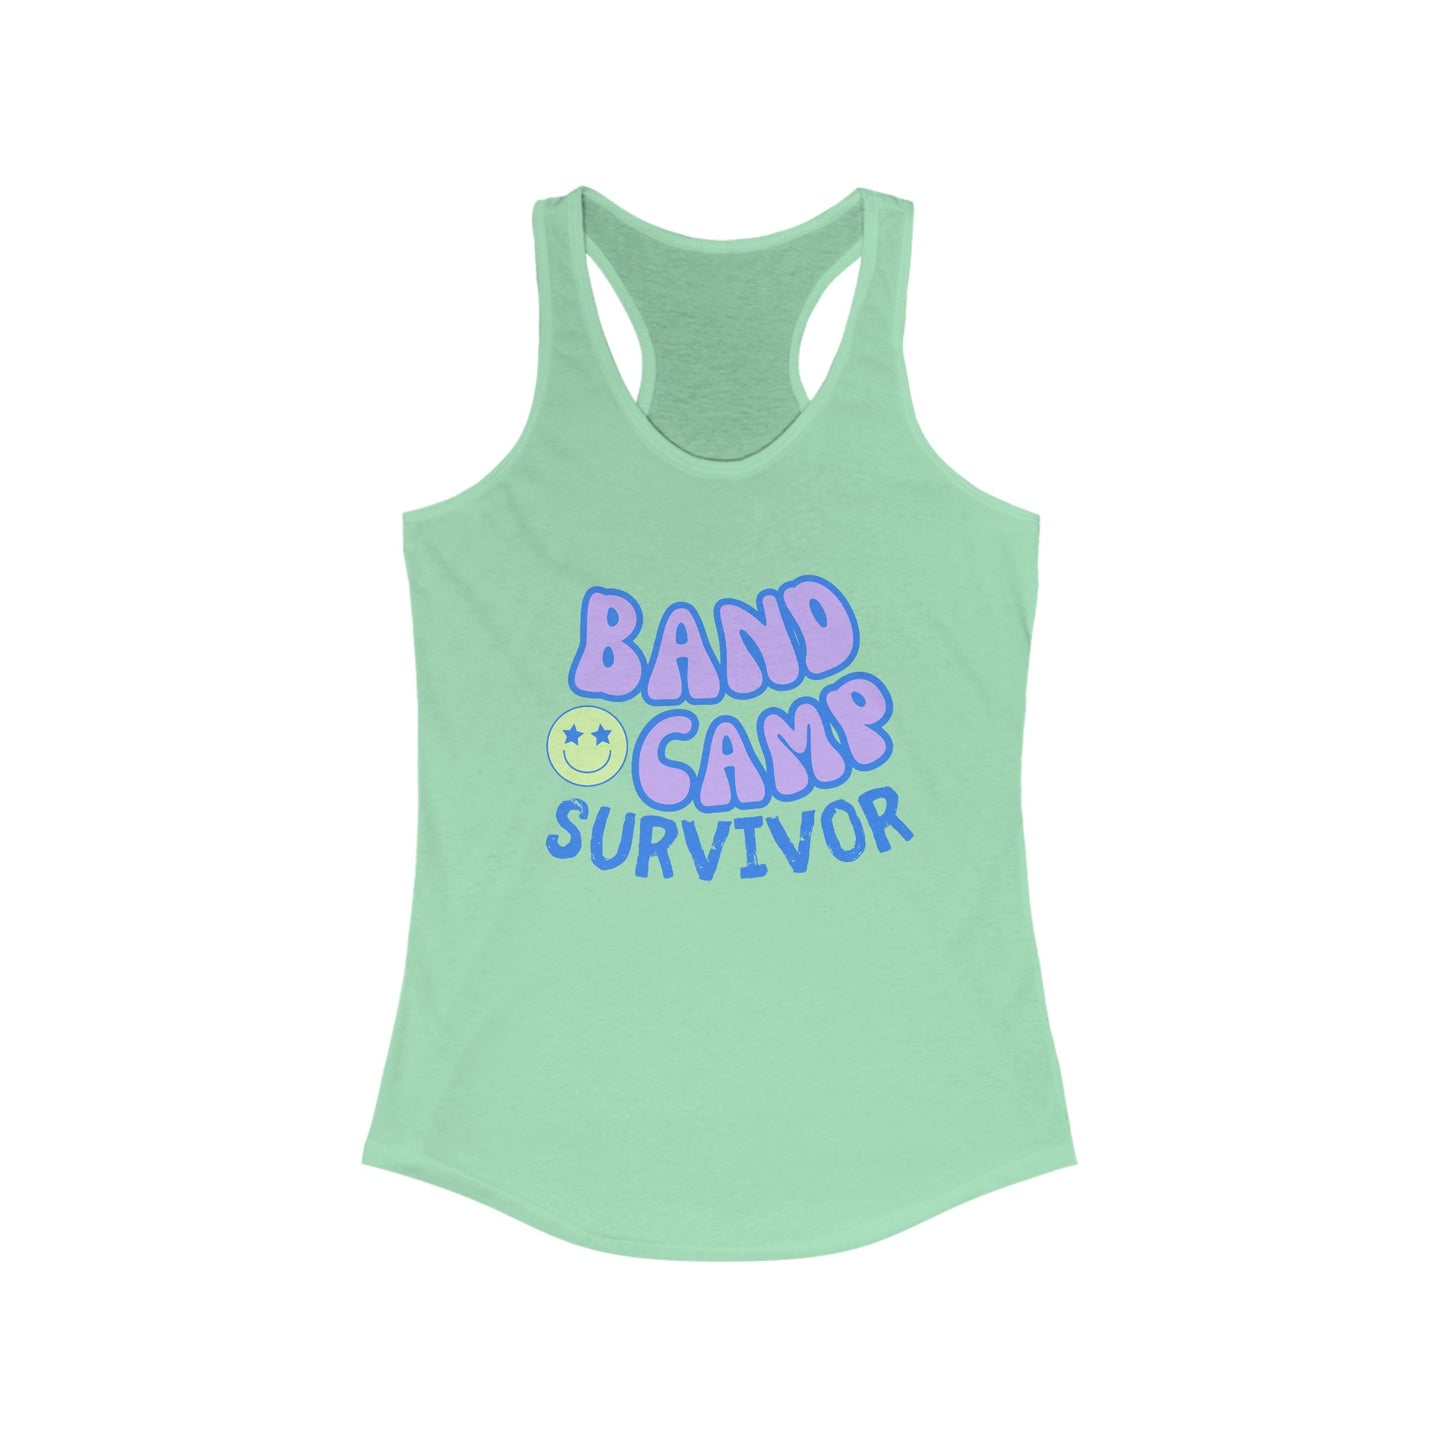 Band Camp Survivor Womens Ideal Racerback Tank, Marching Band Friend Birthday Gift